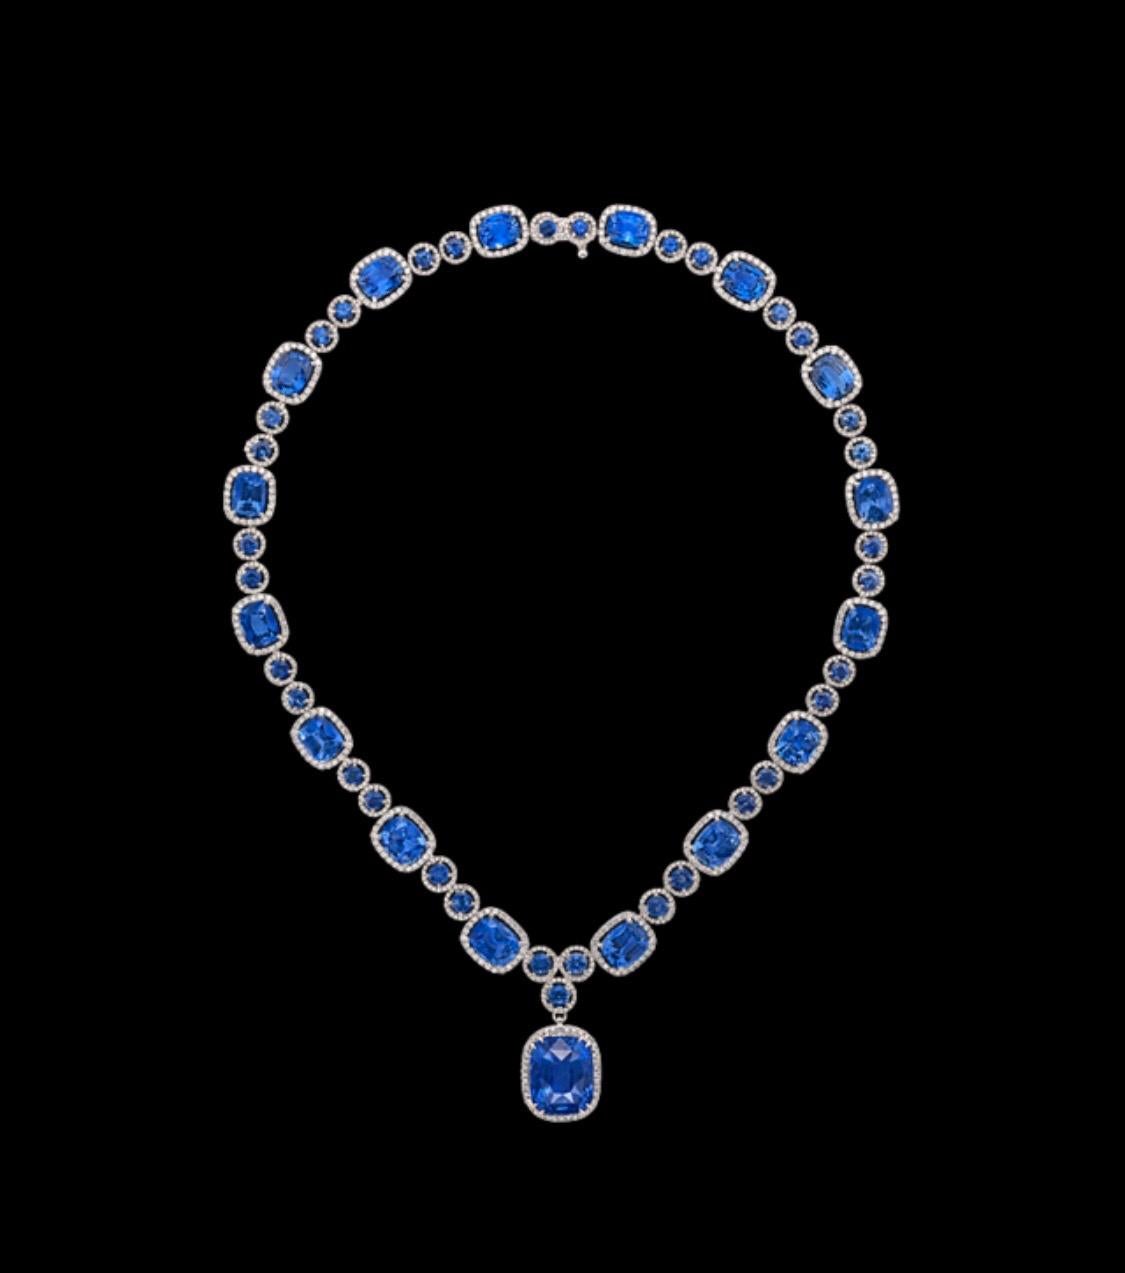 From the Emilio Jewelry Vault, We are Showcasing a stunning necklace which took years of accumulating these precious natural Sapphires to match, and complete this masterpiece. 23.00 Carats of Sapphires only each one is Gia certified, please inquire